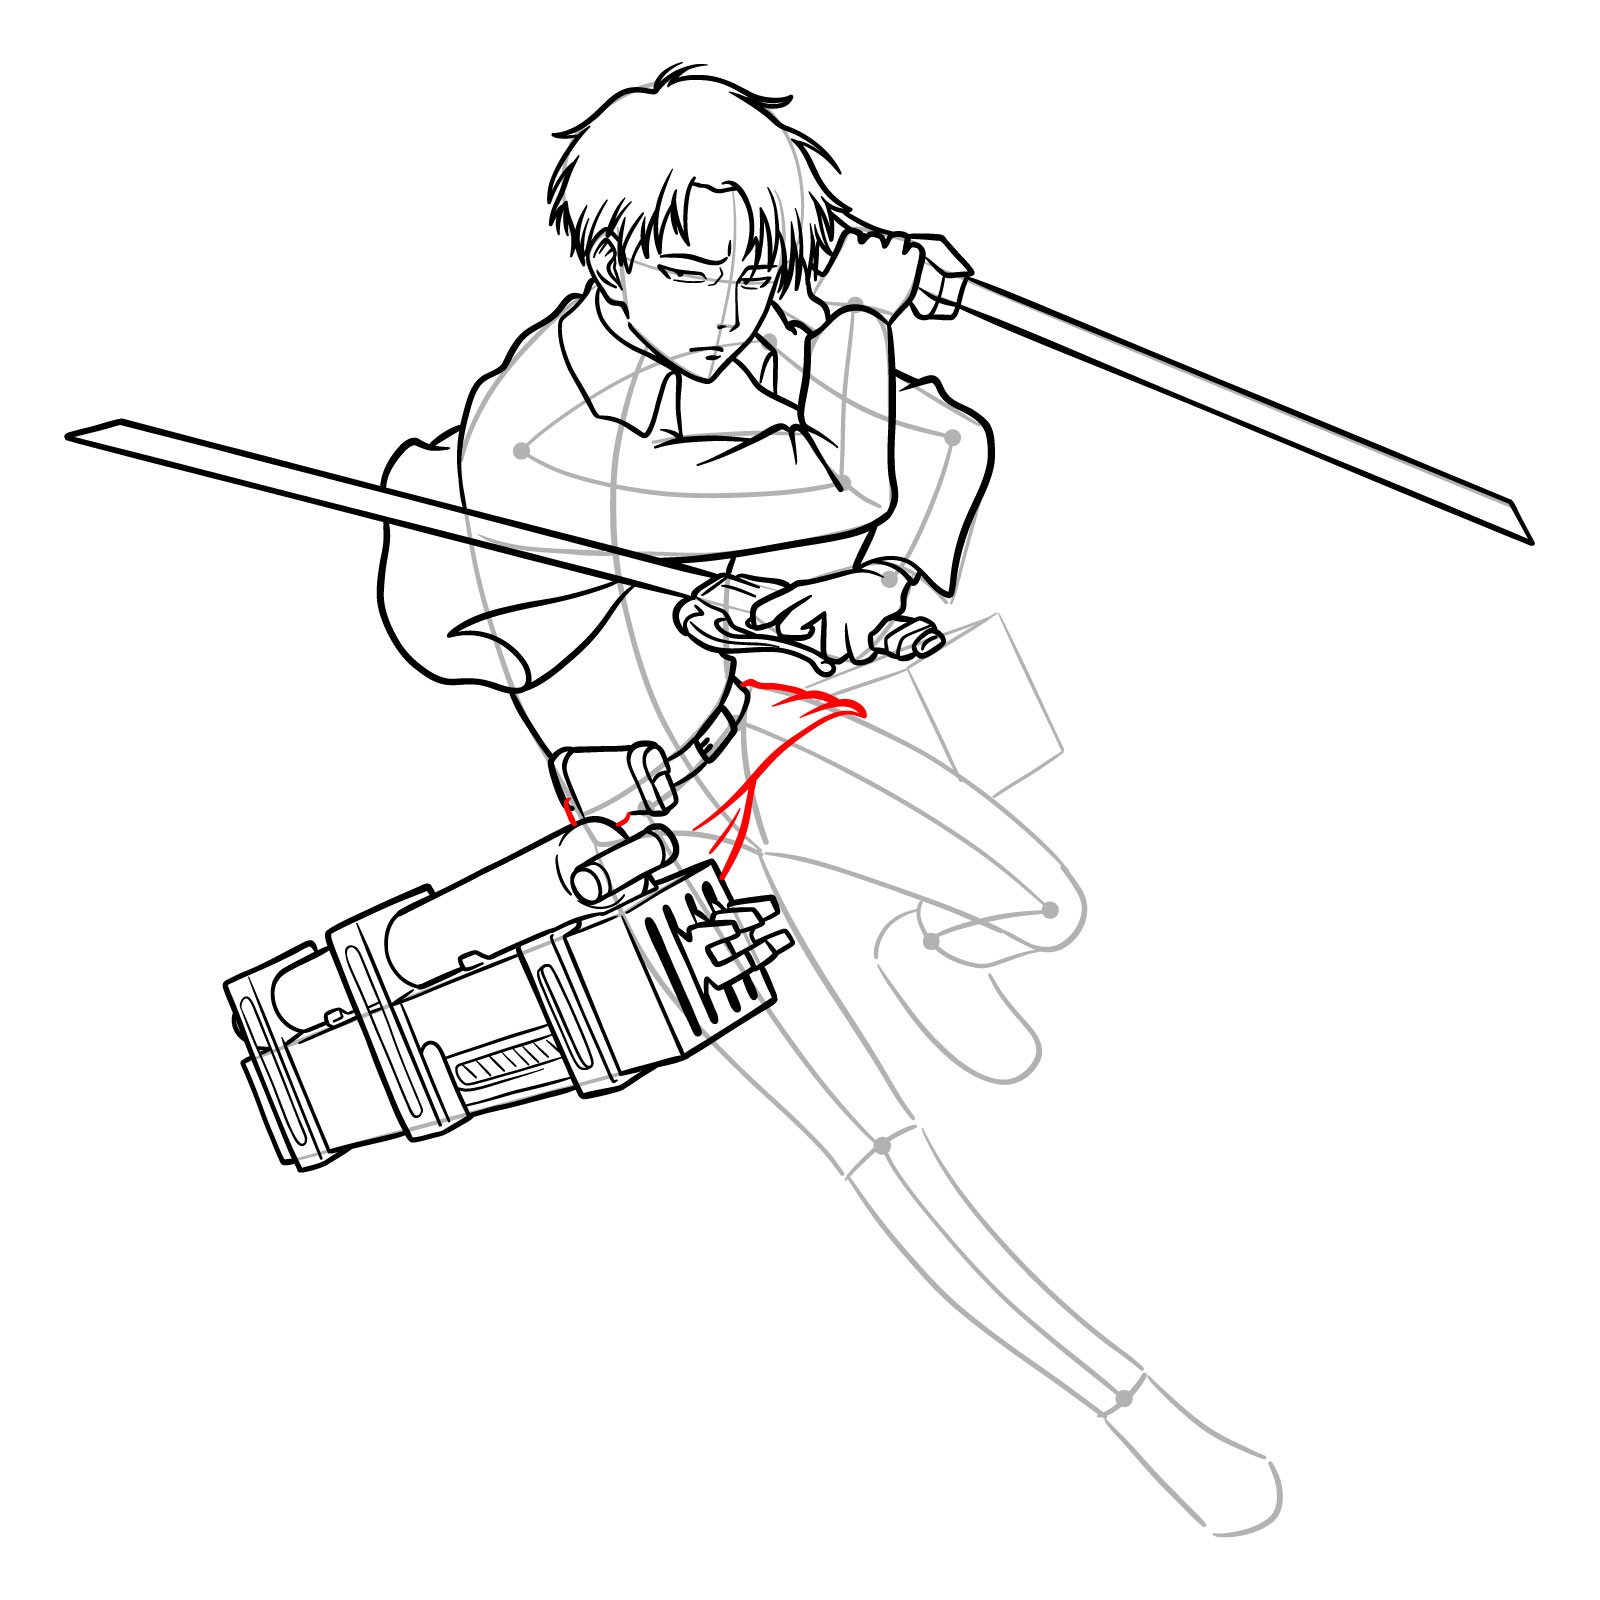 Step-by-step drawing of Captain Levi's legs and uniform details - step 26